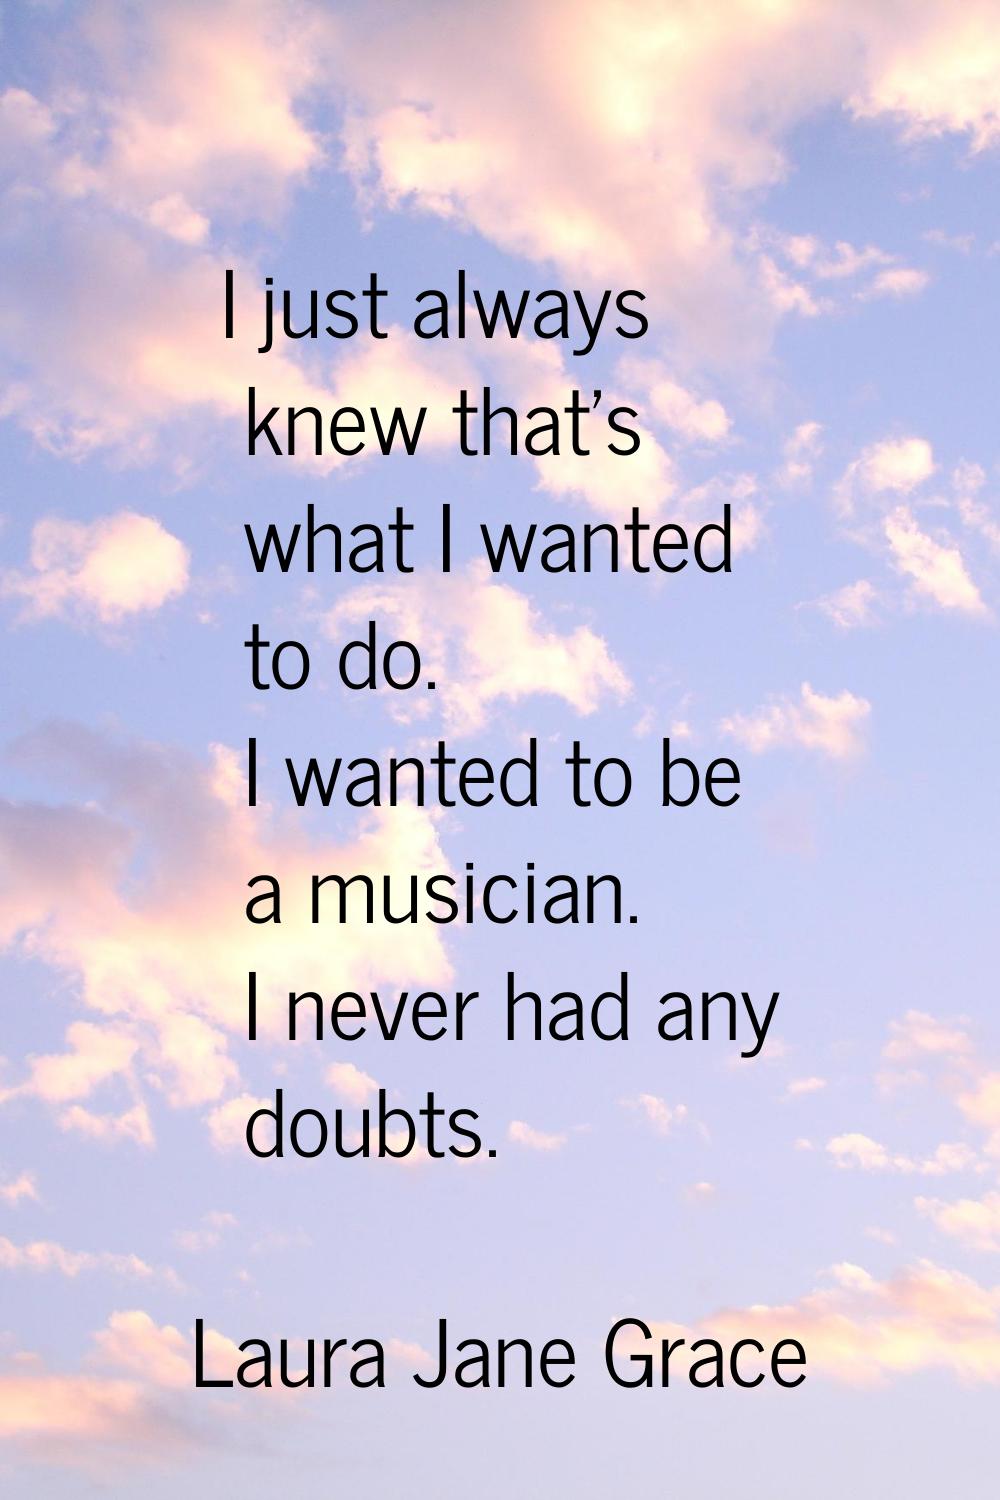 I just always knew that's what I wanted to do. I wanted to be a musician. I never had any doubts.